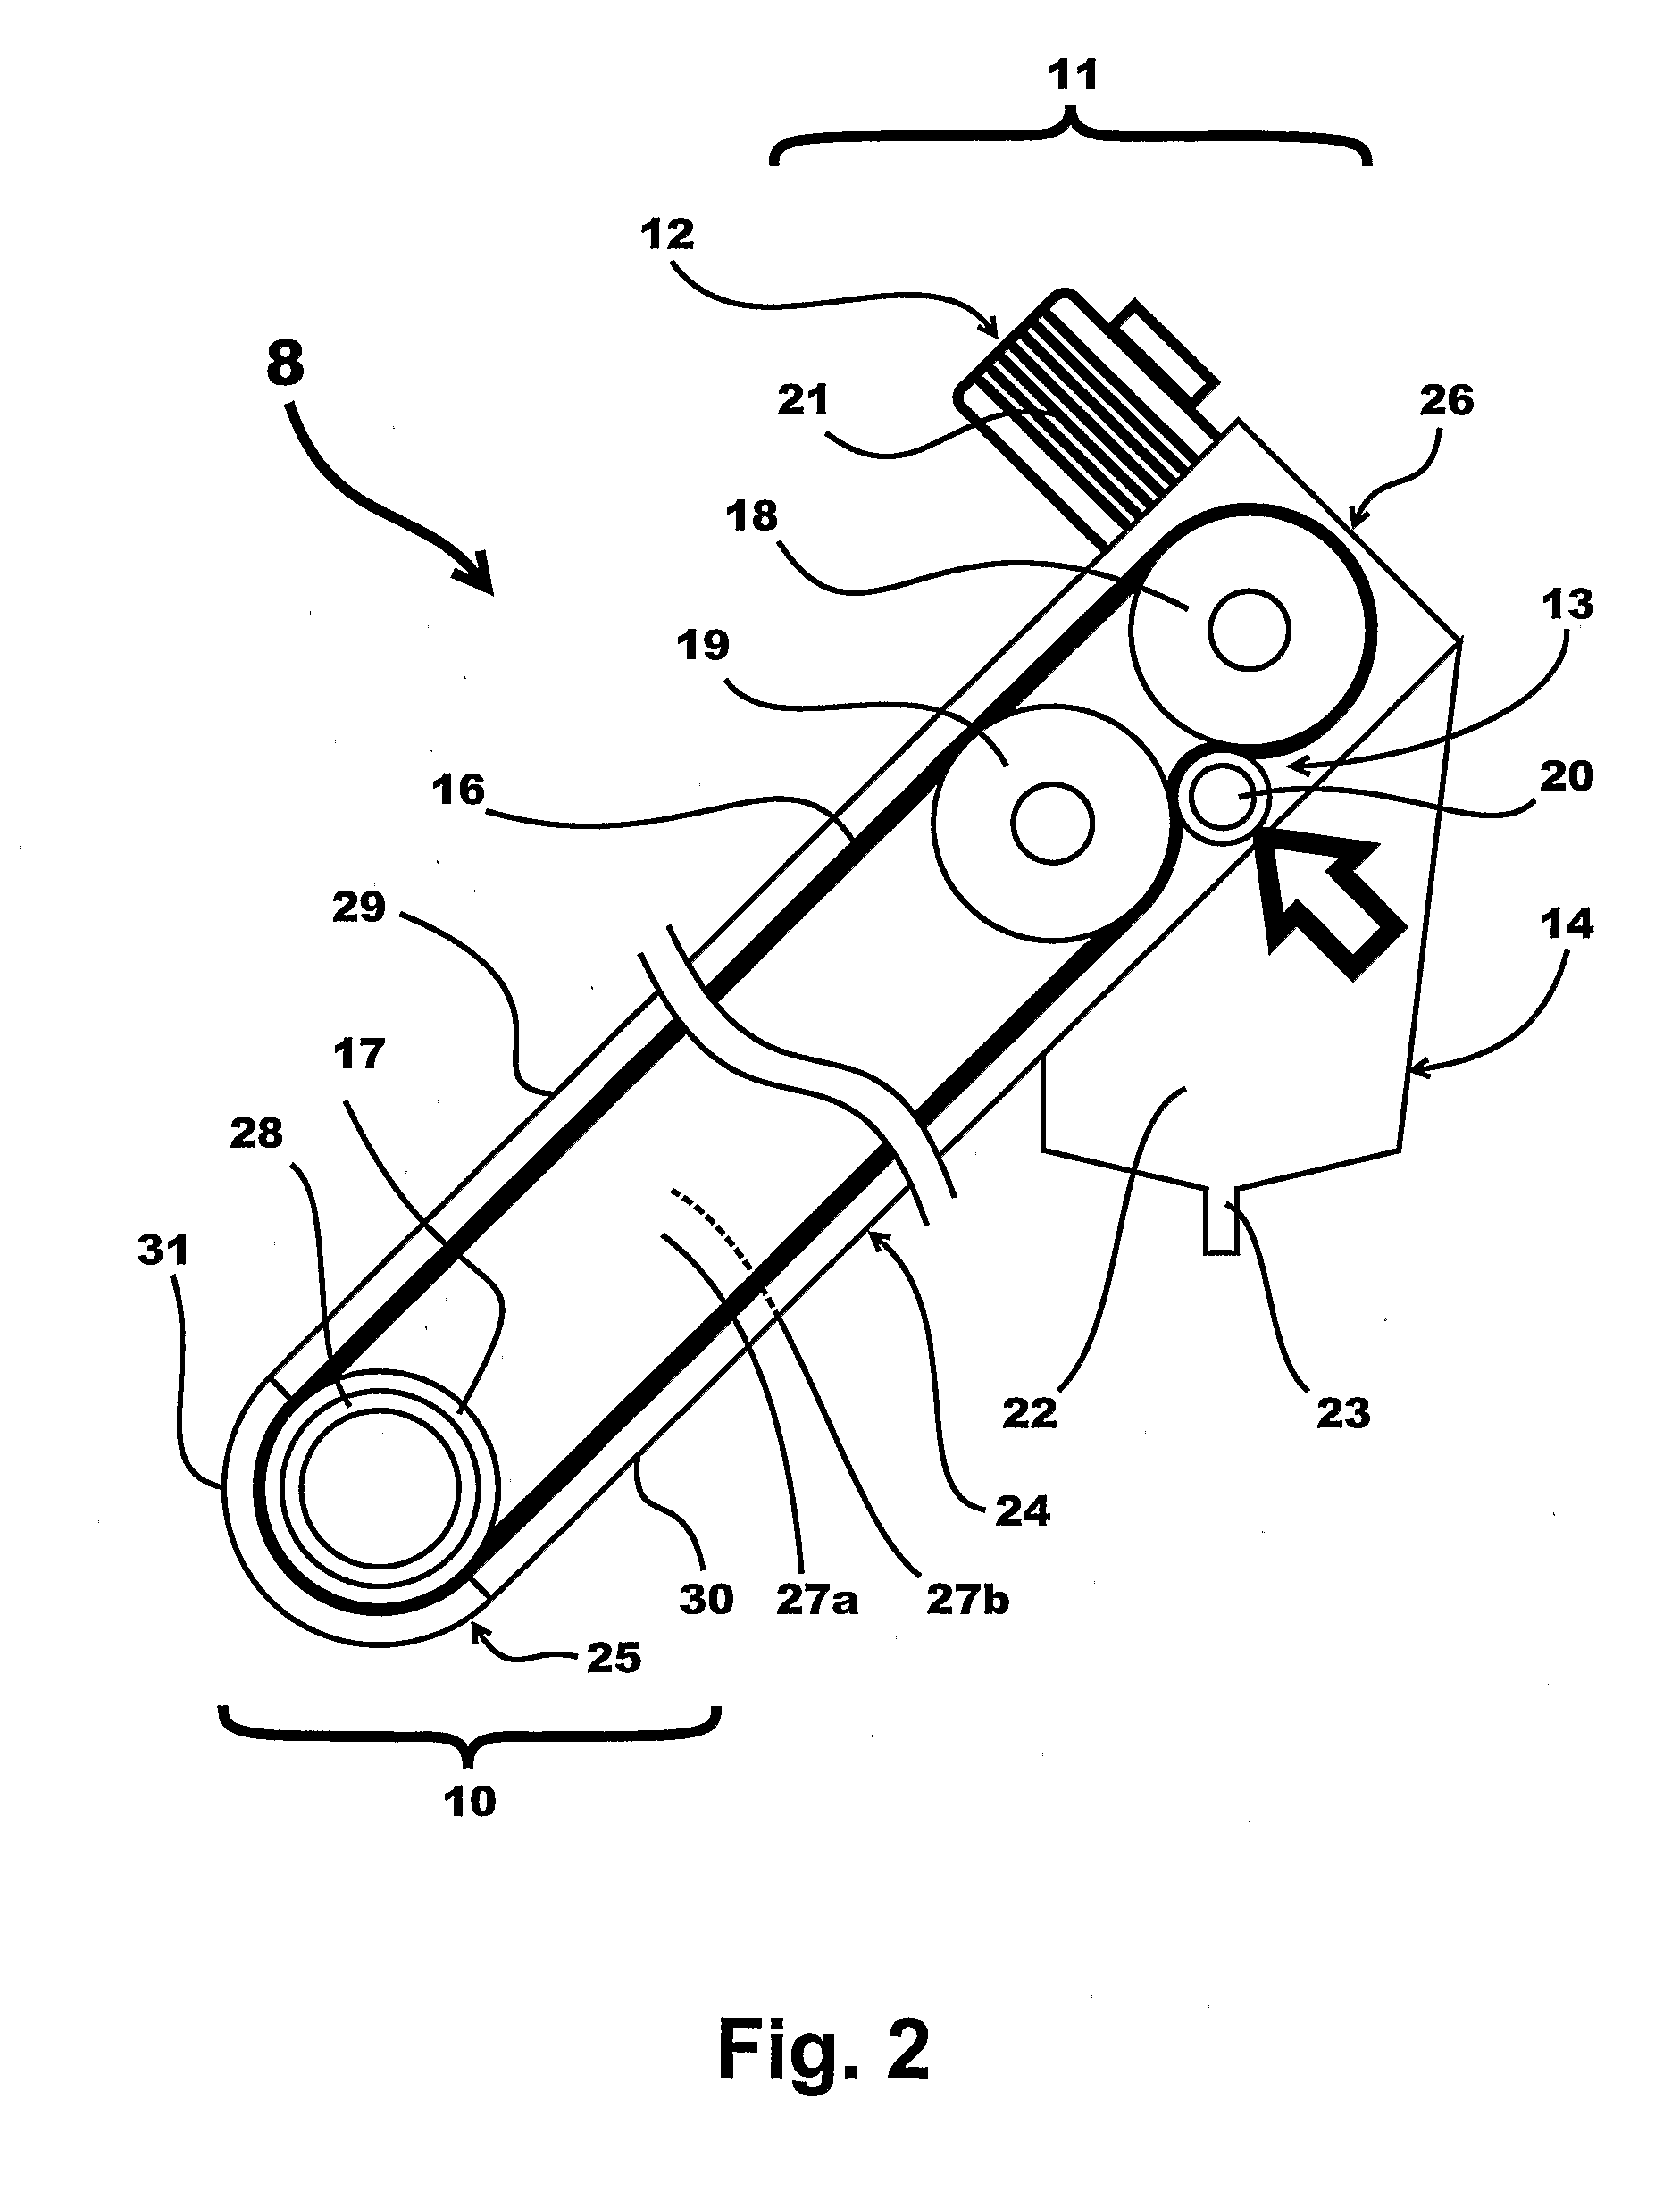 Ship with a contaminant separation device